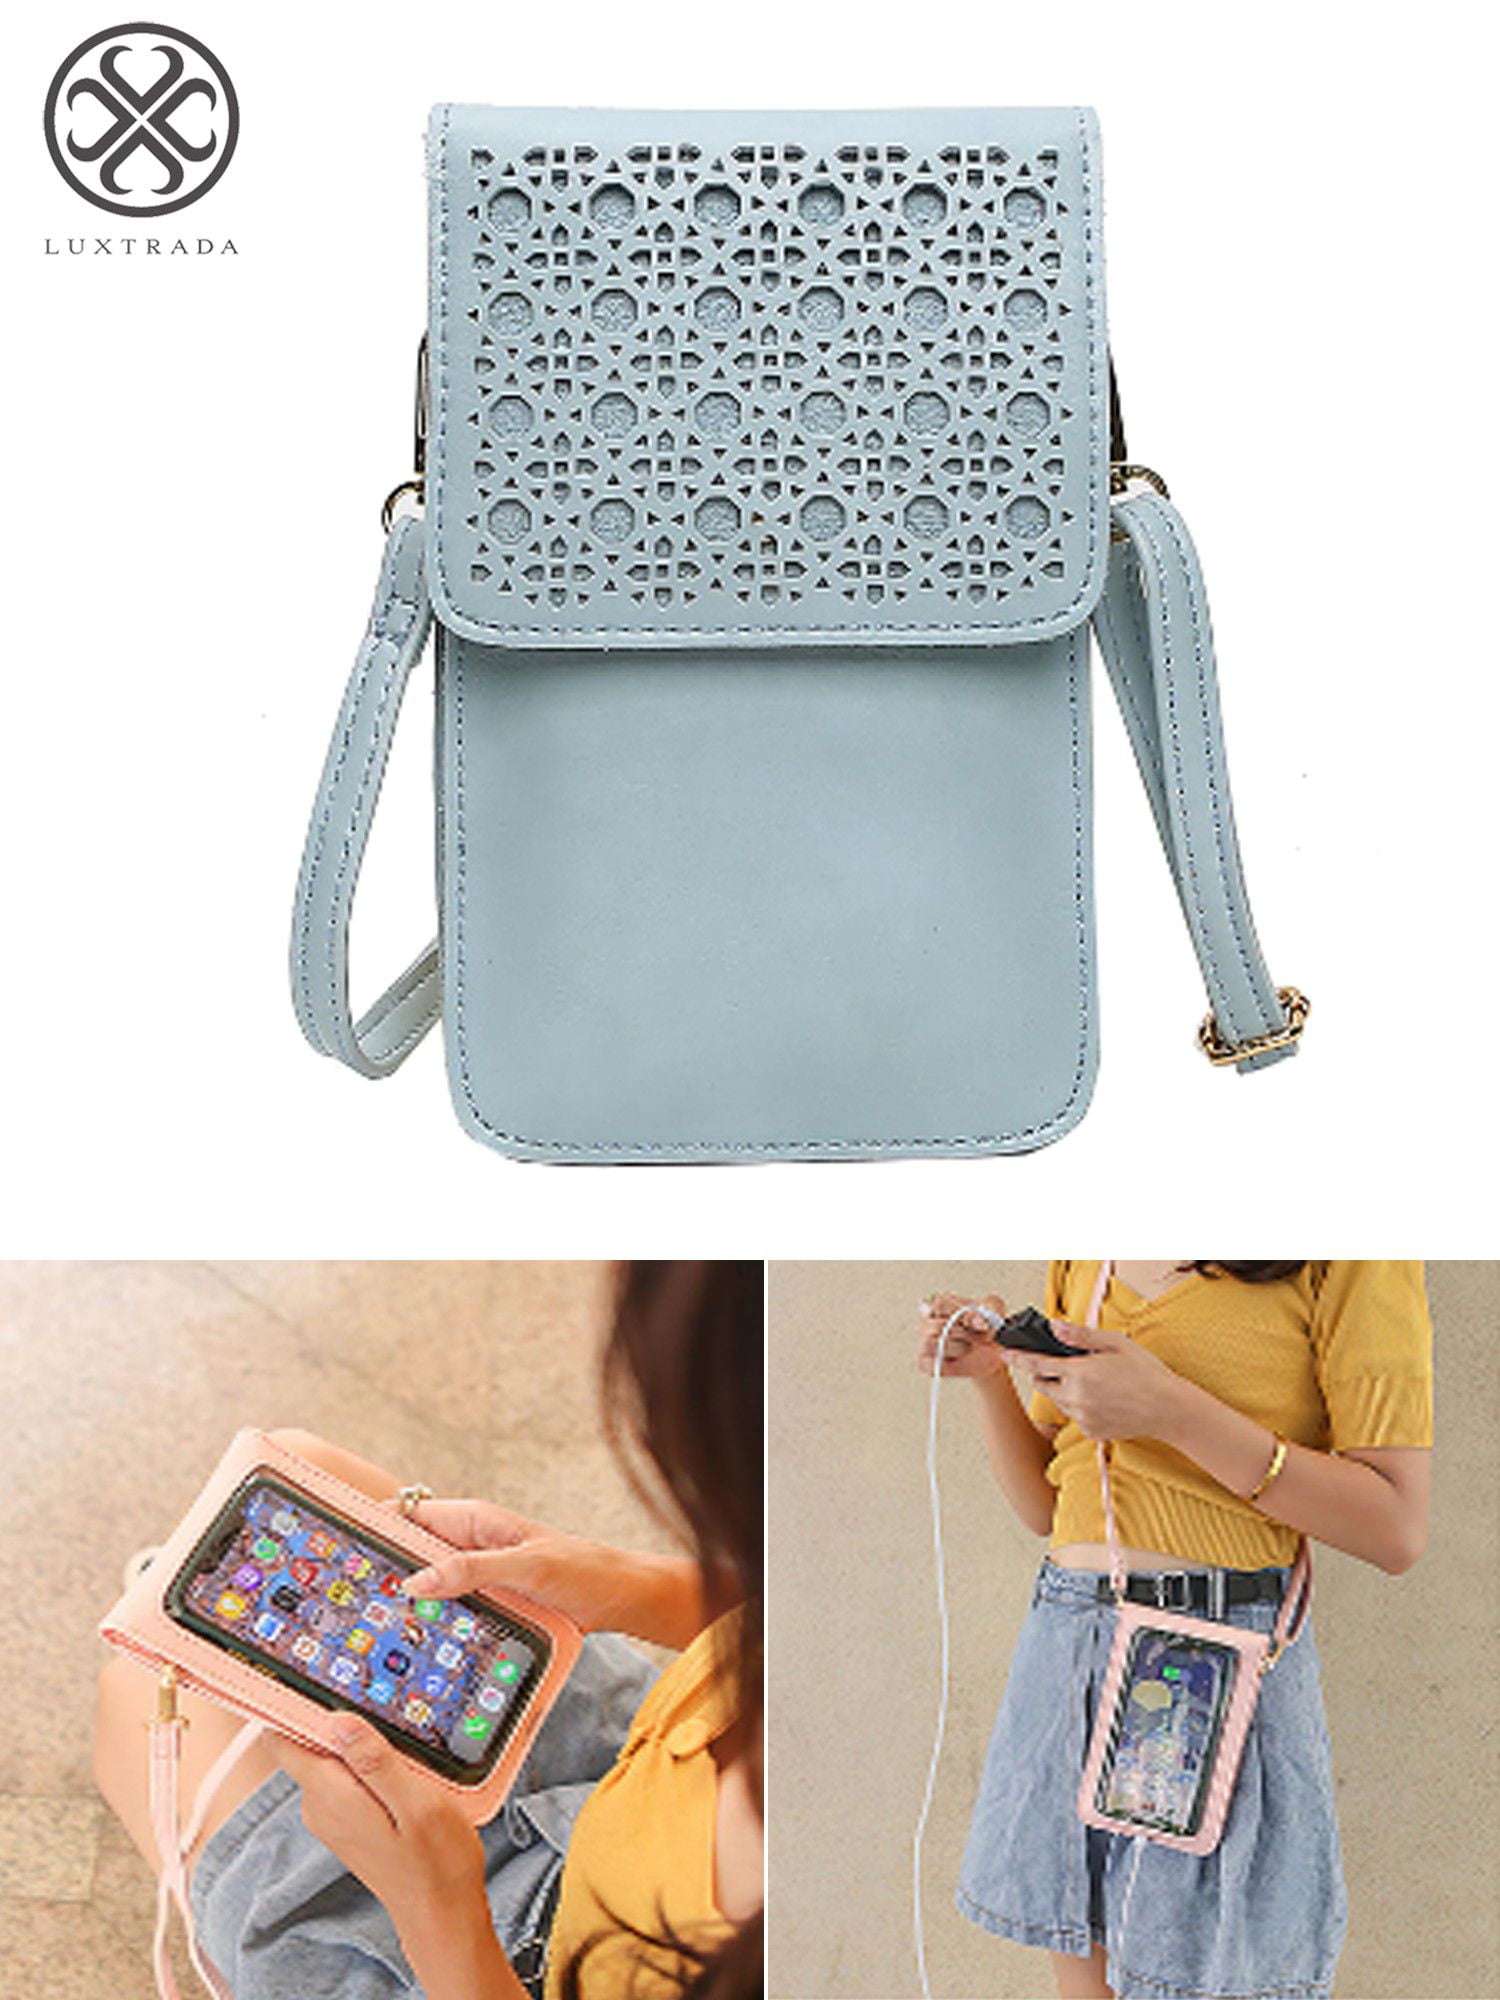 Both comfortable and chicLuxtrada Cell Phone Bag, PU Leather Cell Phone ...